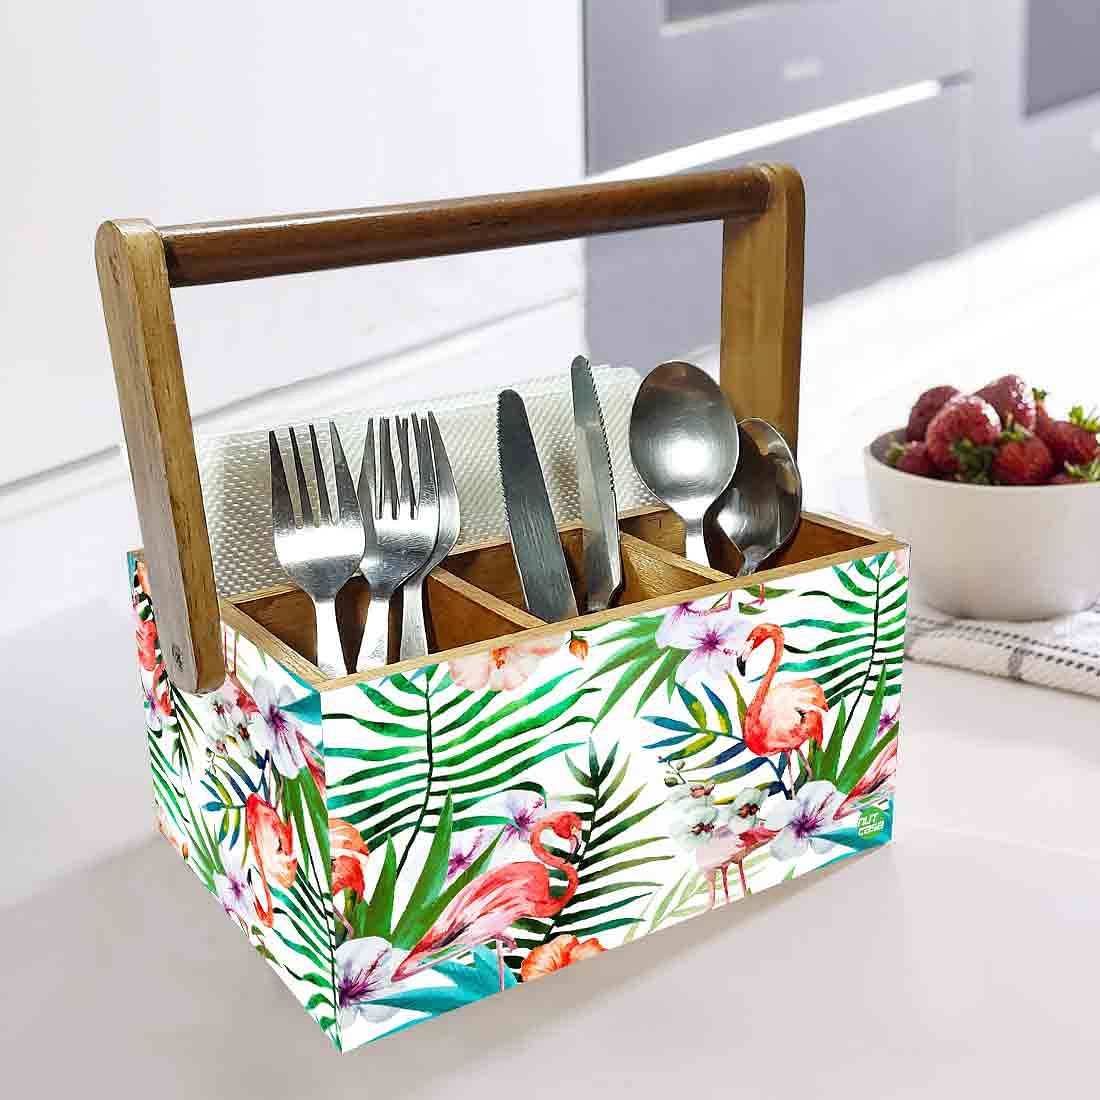 Cutlery Stand for Dining Table Forks Knives & Spoons Organizer - Swan and Leaves Nutcase